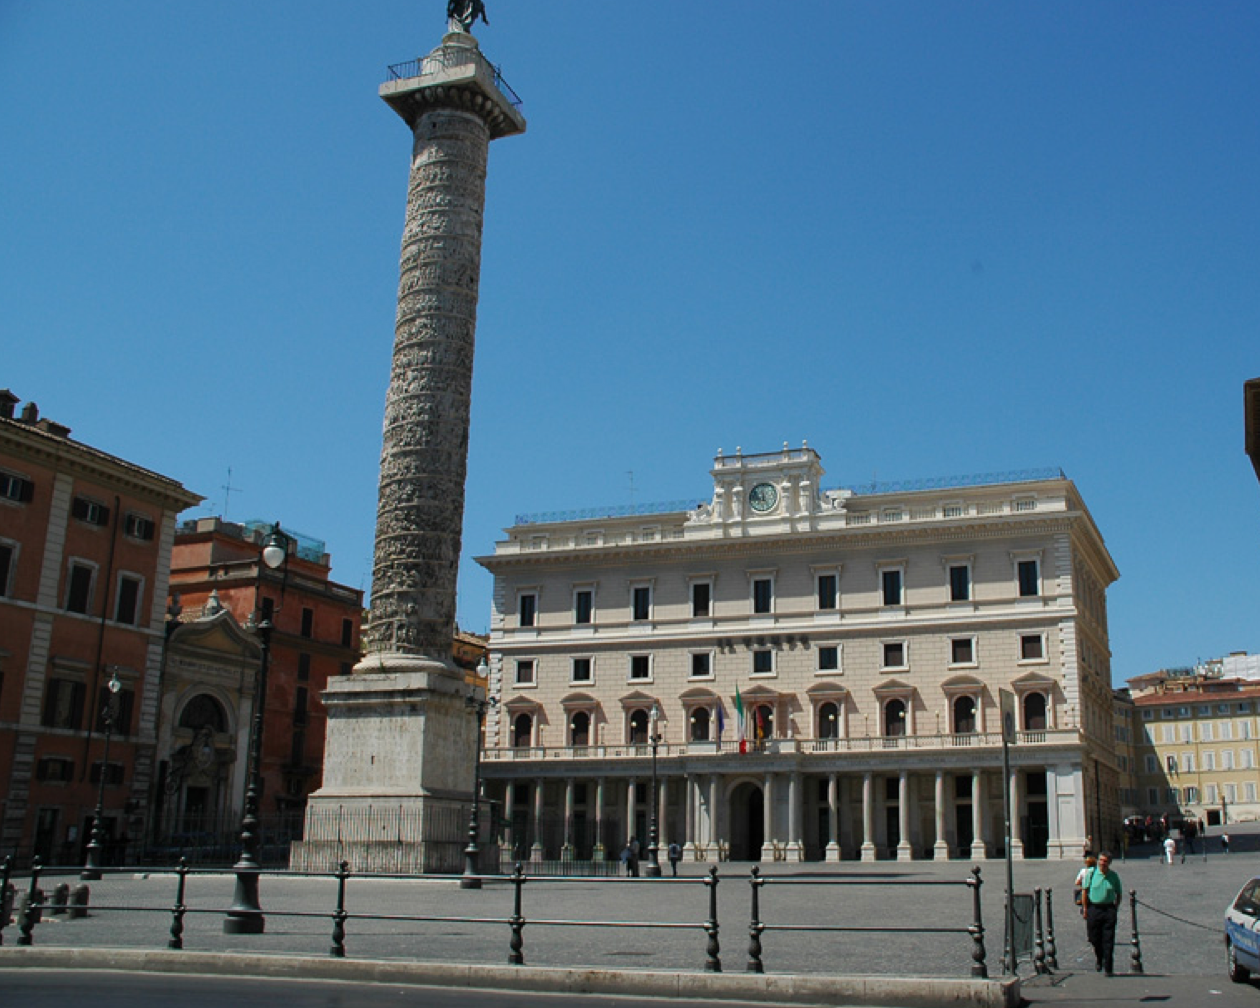 Colonna Gallery, Rome: All year